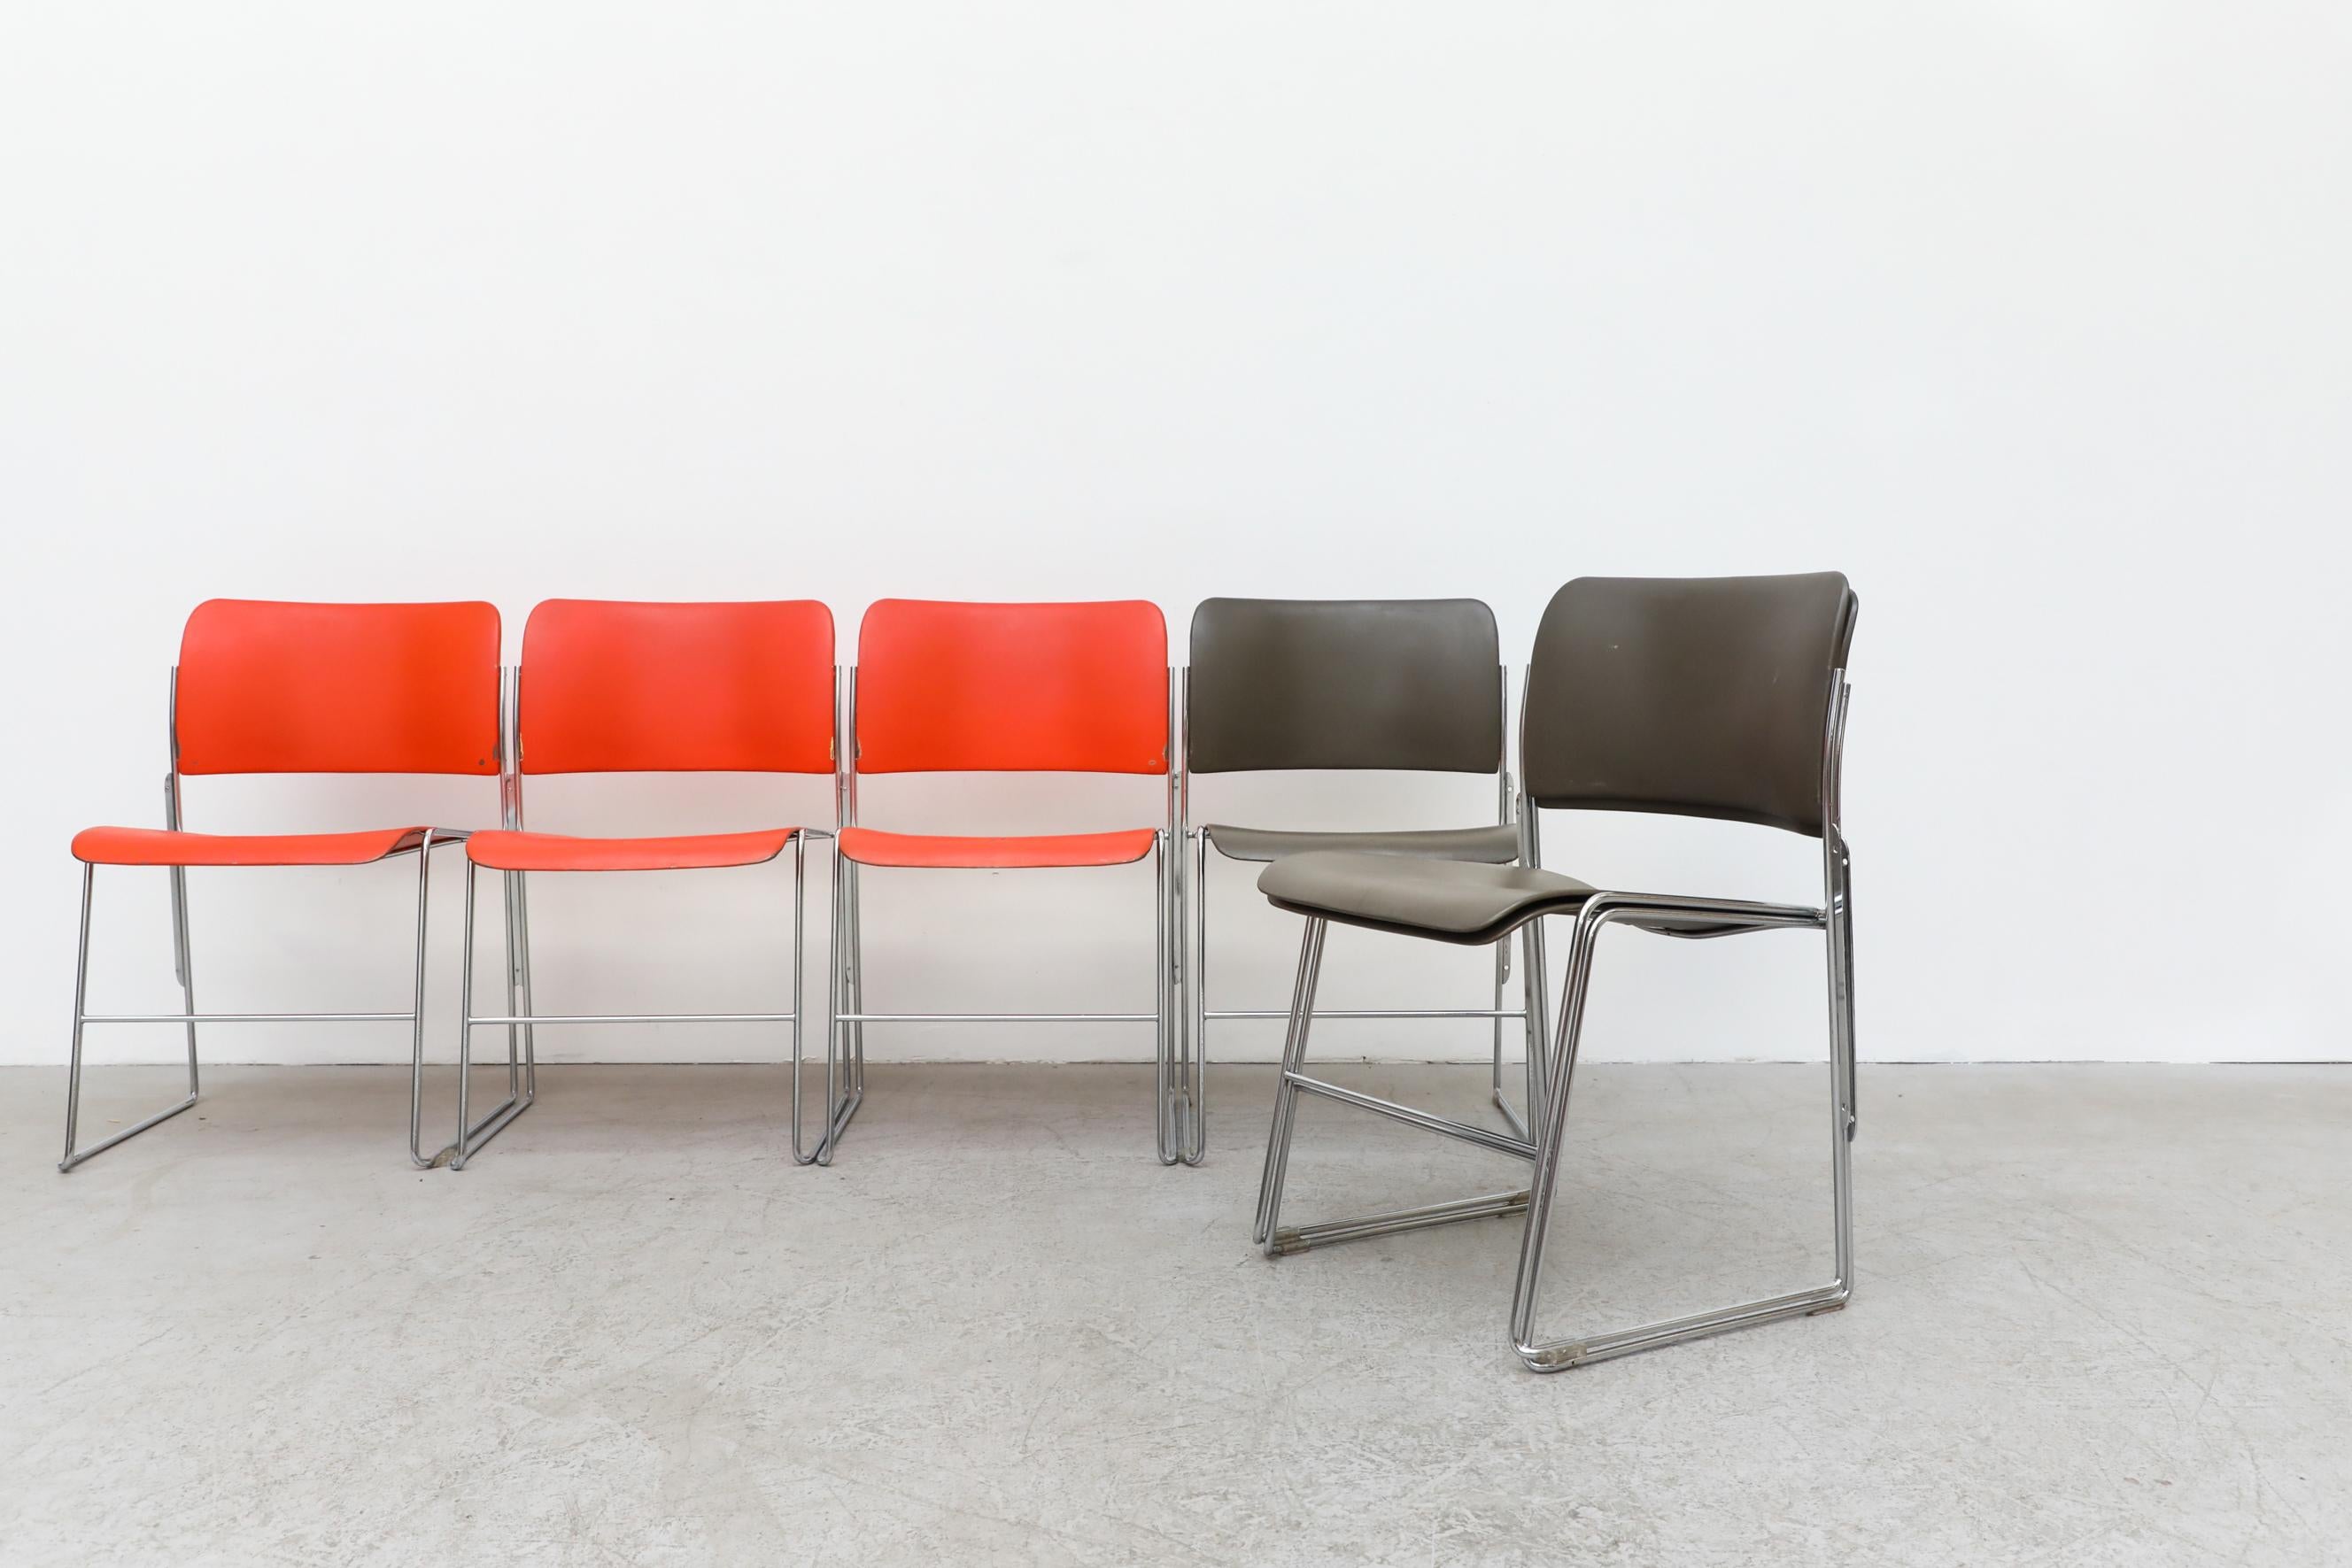 The 40/4 metal stacking chairs designed by David Rowland for The General Fireproofing Co, 1974. Award wining chair design, featured in multiple museums. Available in orange and grey. In original condition with visible wear, consistent with their age